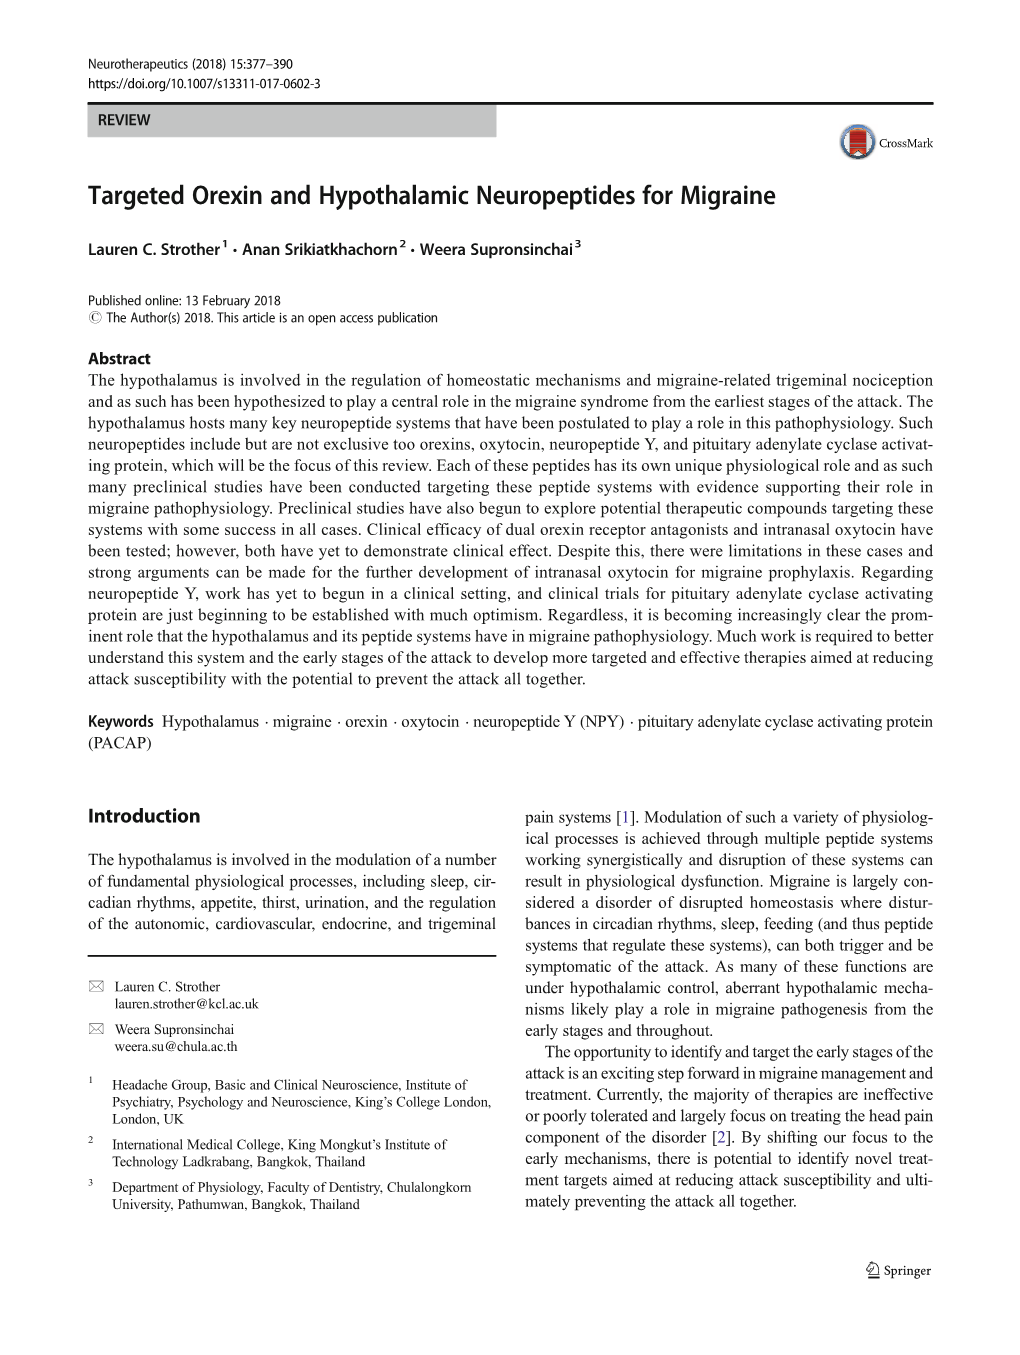 Targeted Orexin and Hypothalamic Neuropeptides for Migraine